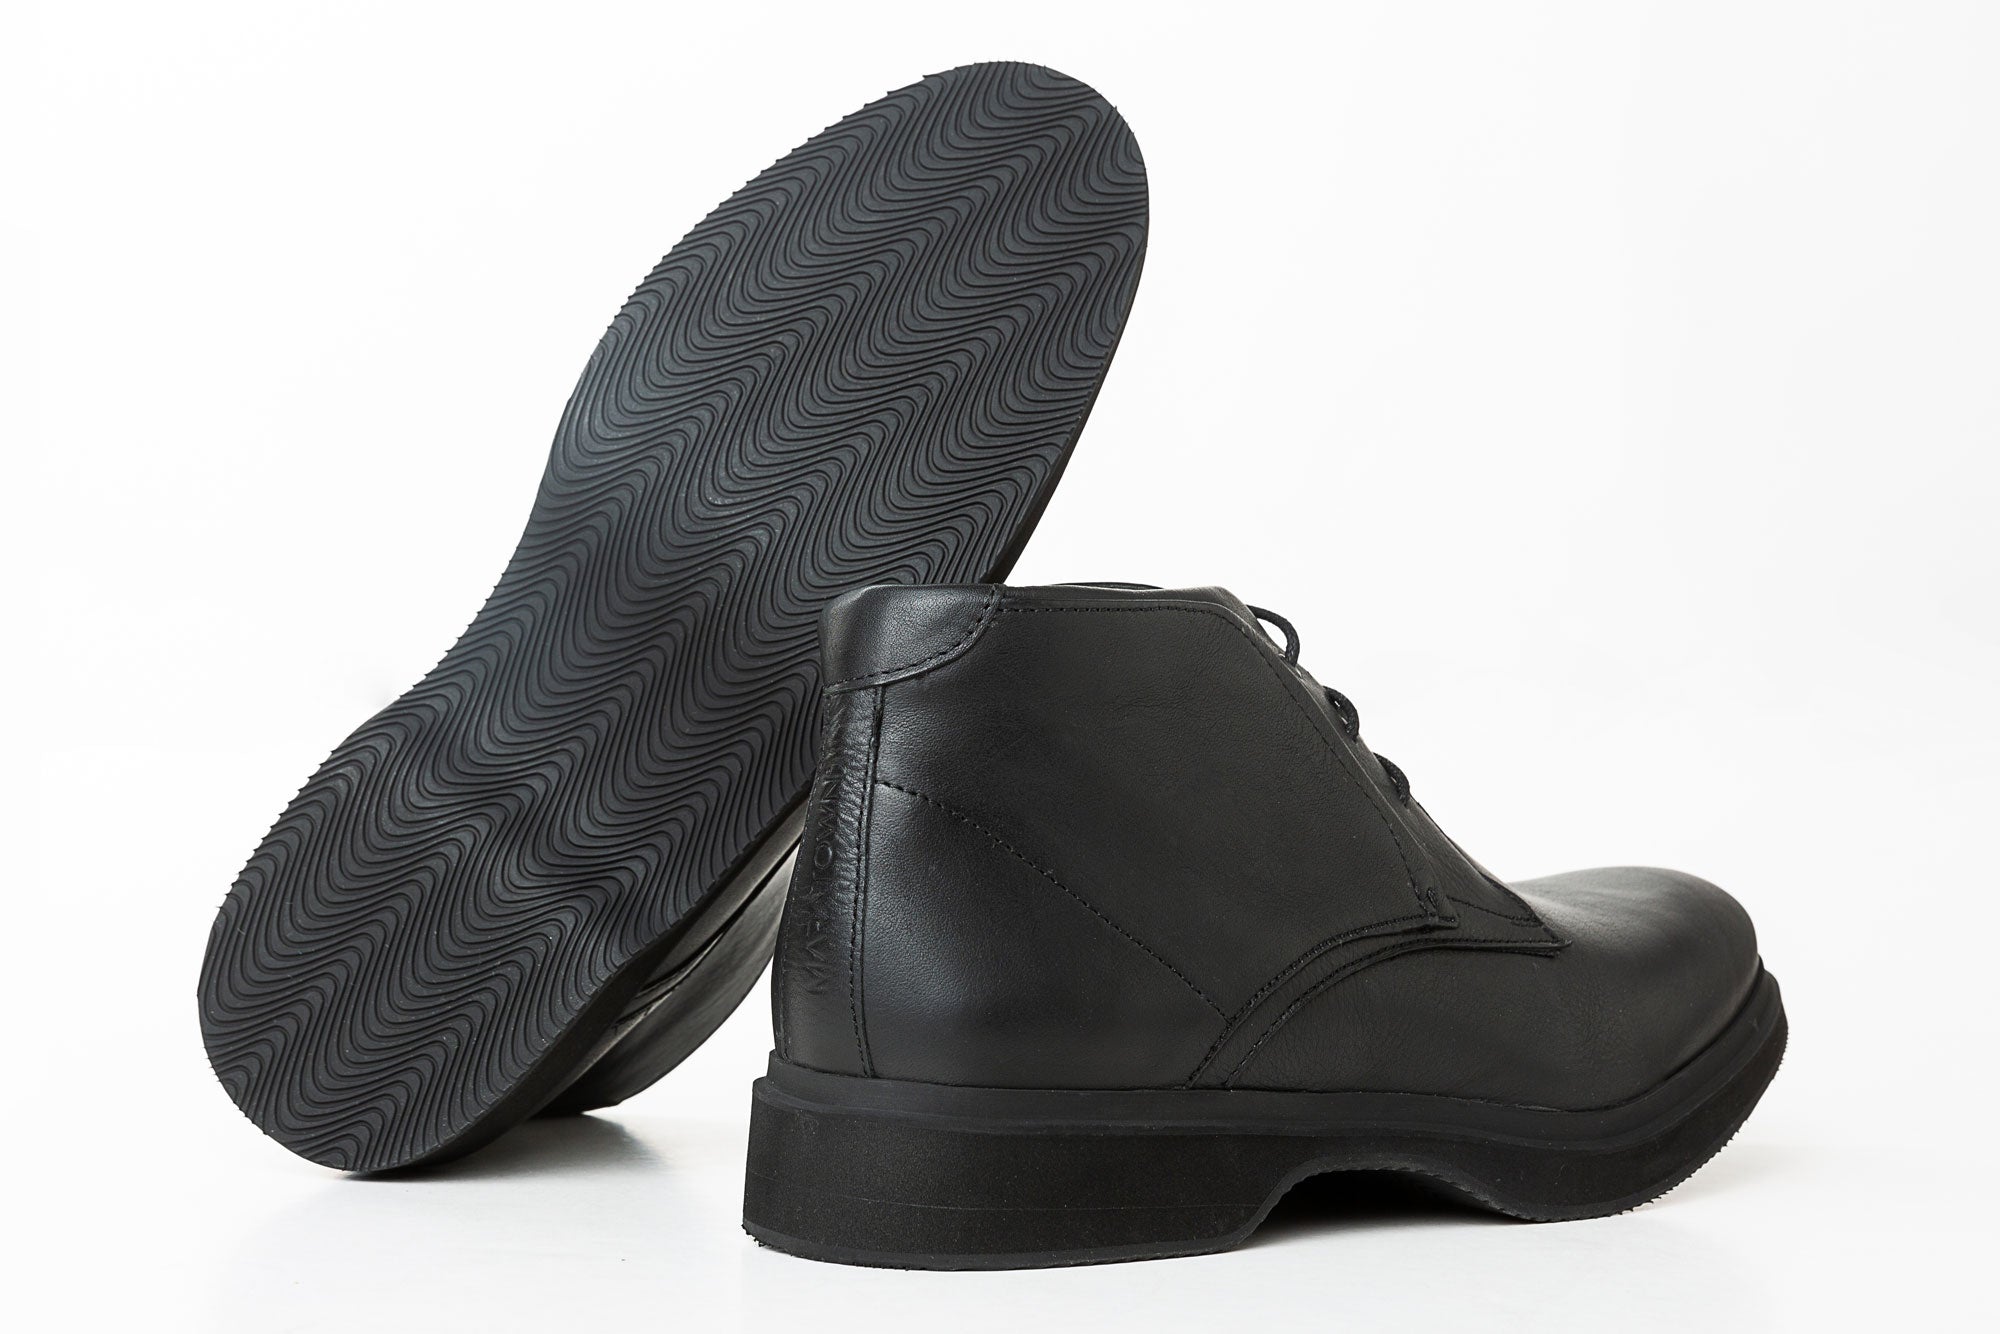 Most Comfortable Mens Dress Shoes For Walking, MARATOWN